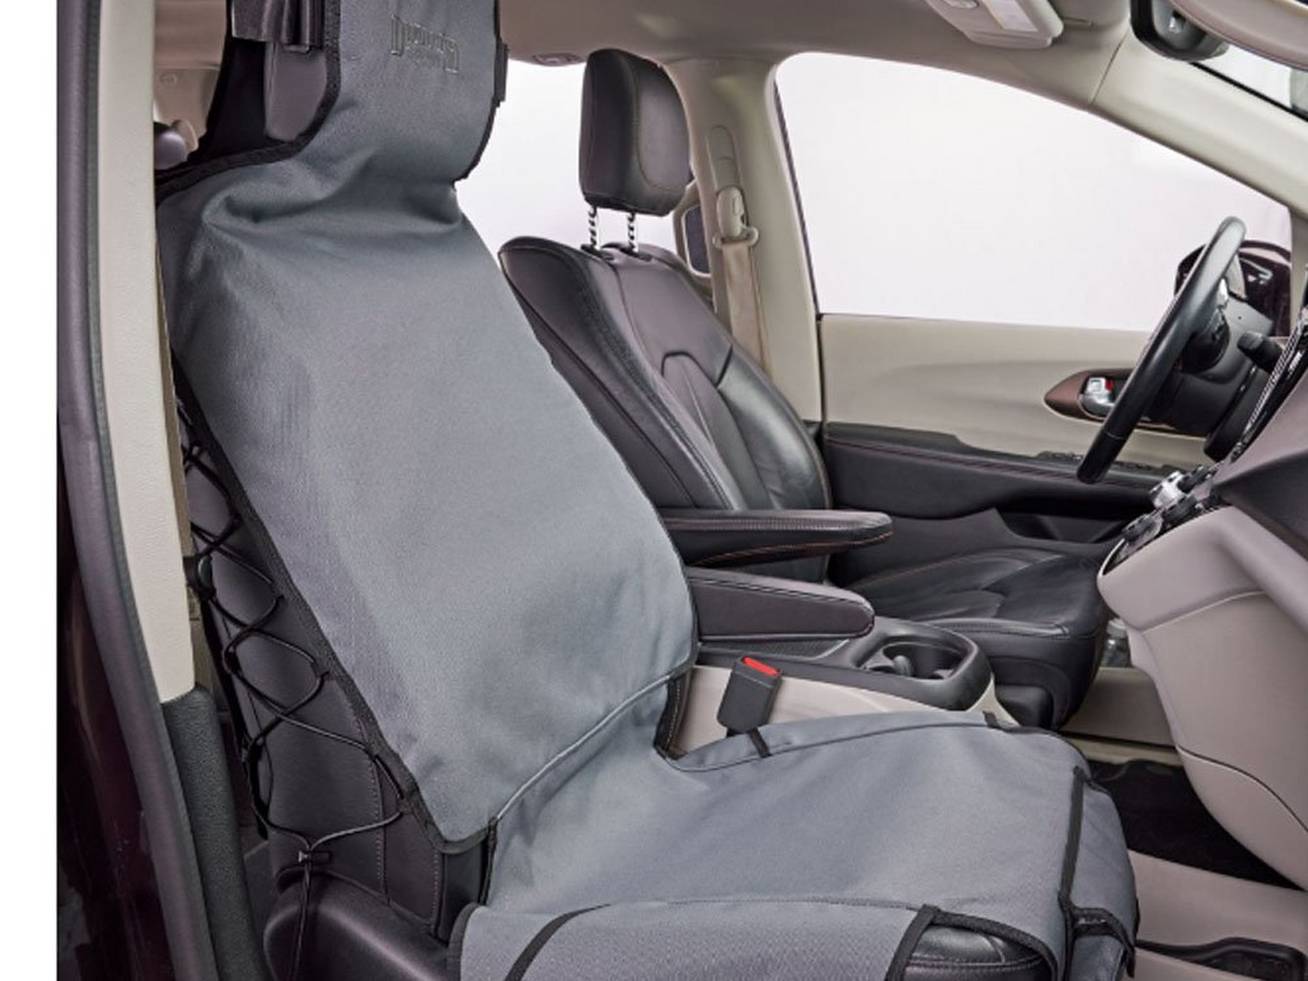 The interior of a car with a protective cover on the passenger seat.